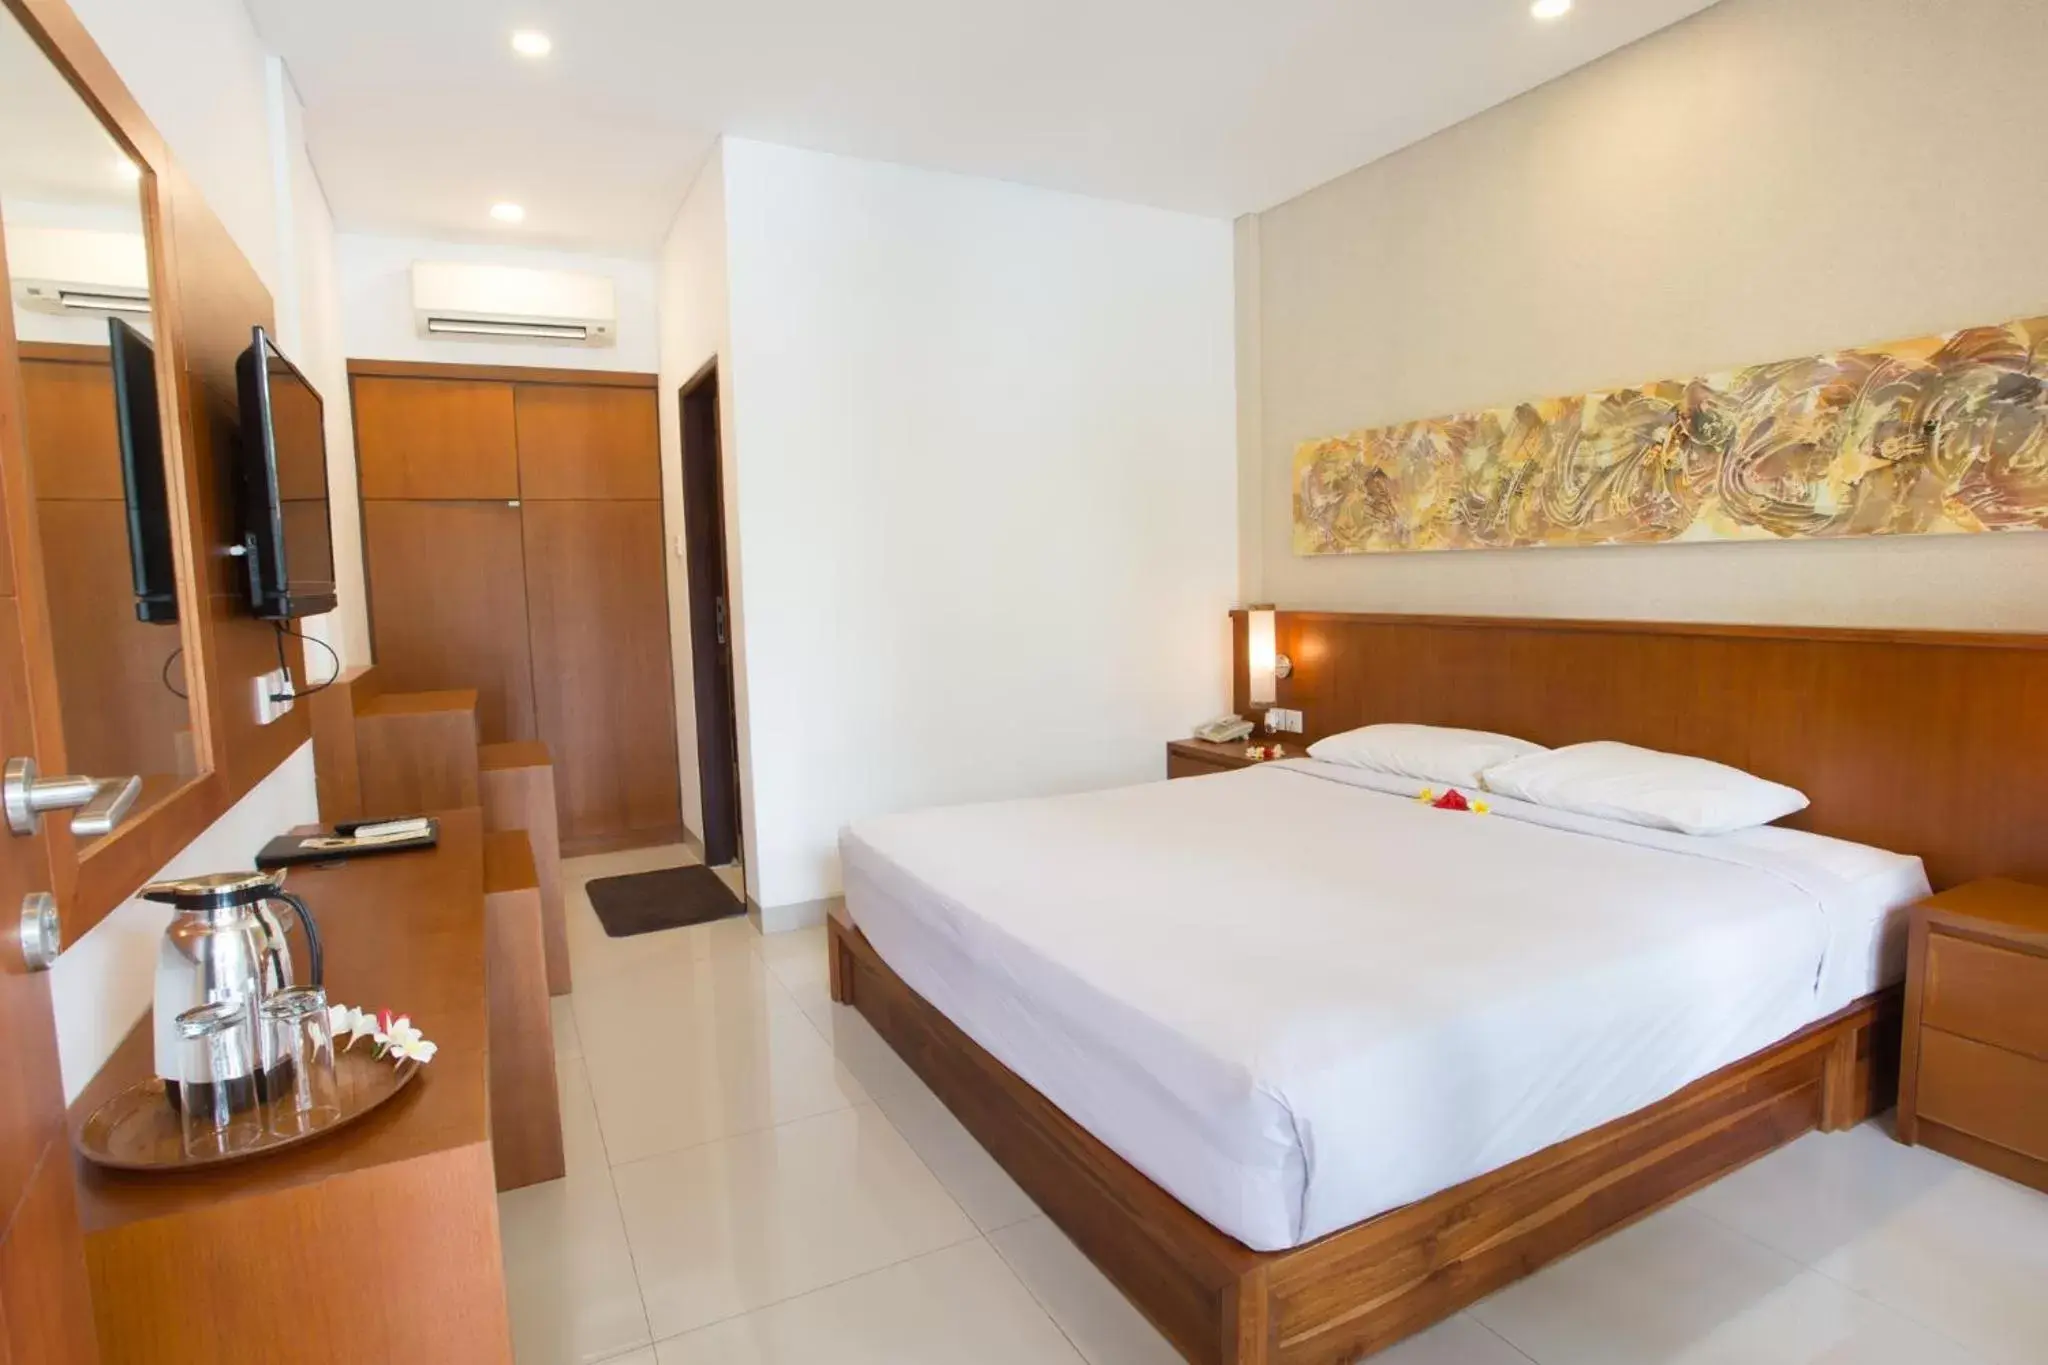 Bed, Room Photo in Sinar Bali Hotel